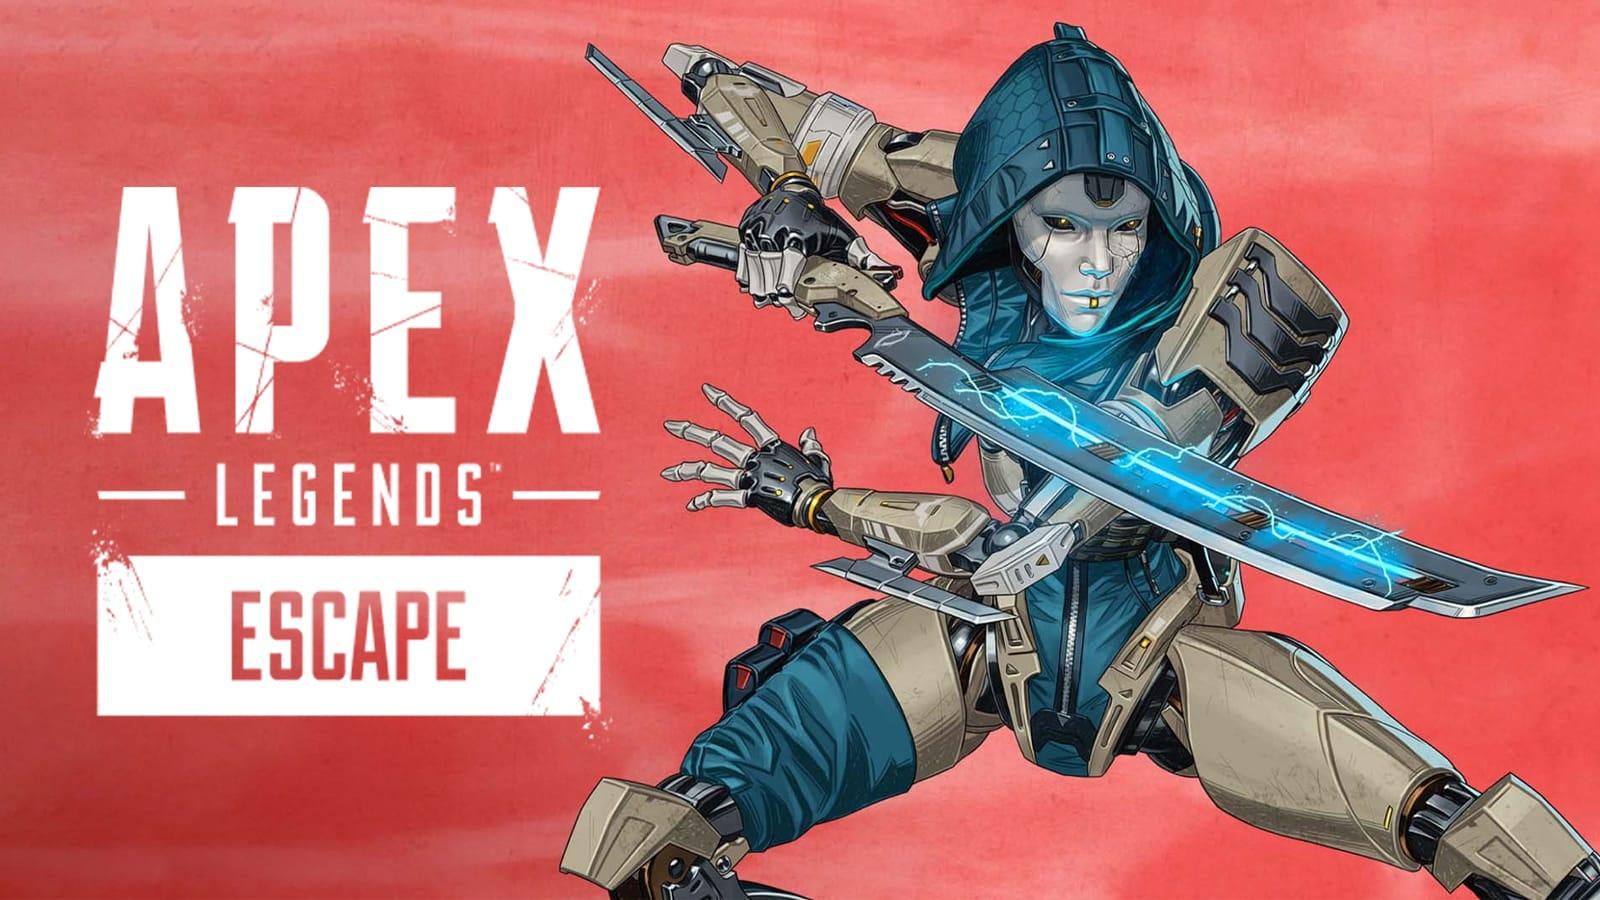 Everything you need to know about 'Apex Legends'' newest hero Ash